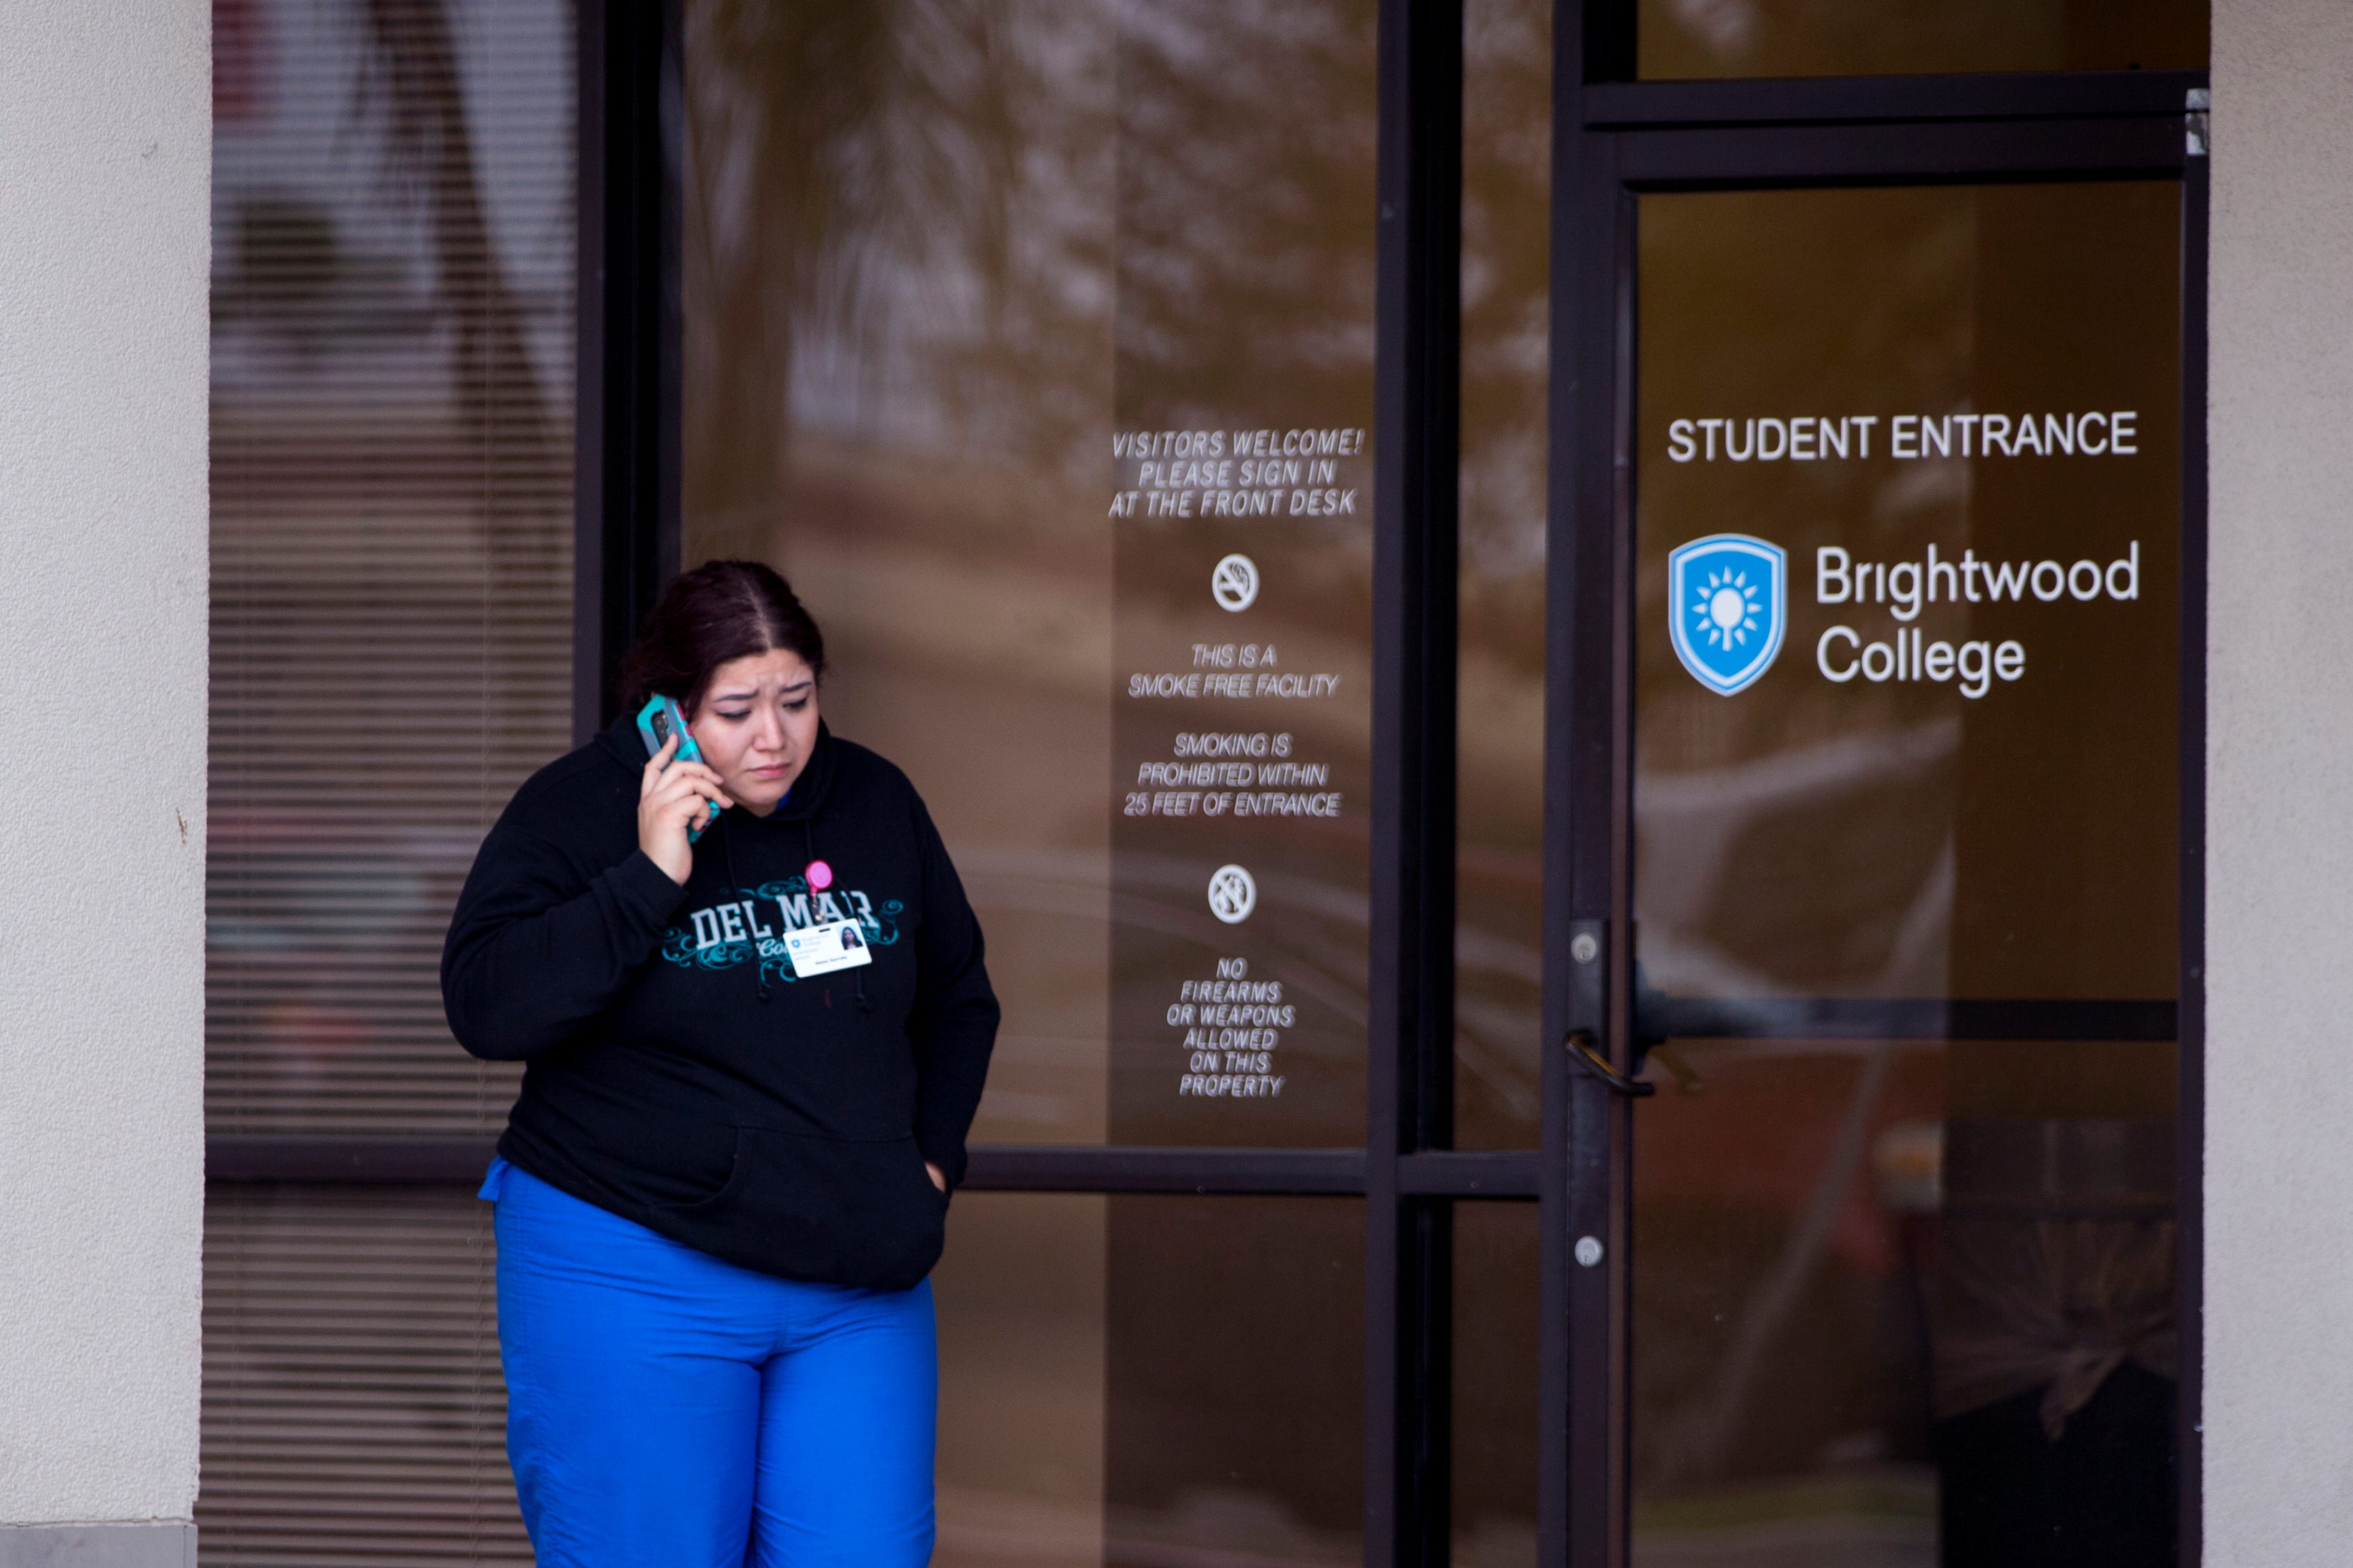 Why Brightwood College, Virginia College are closing &mdash; and what students should do